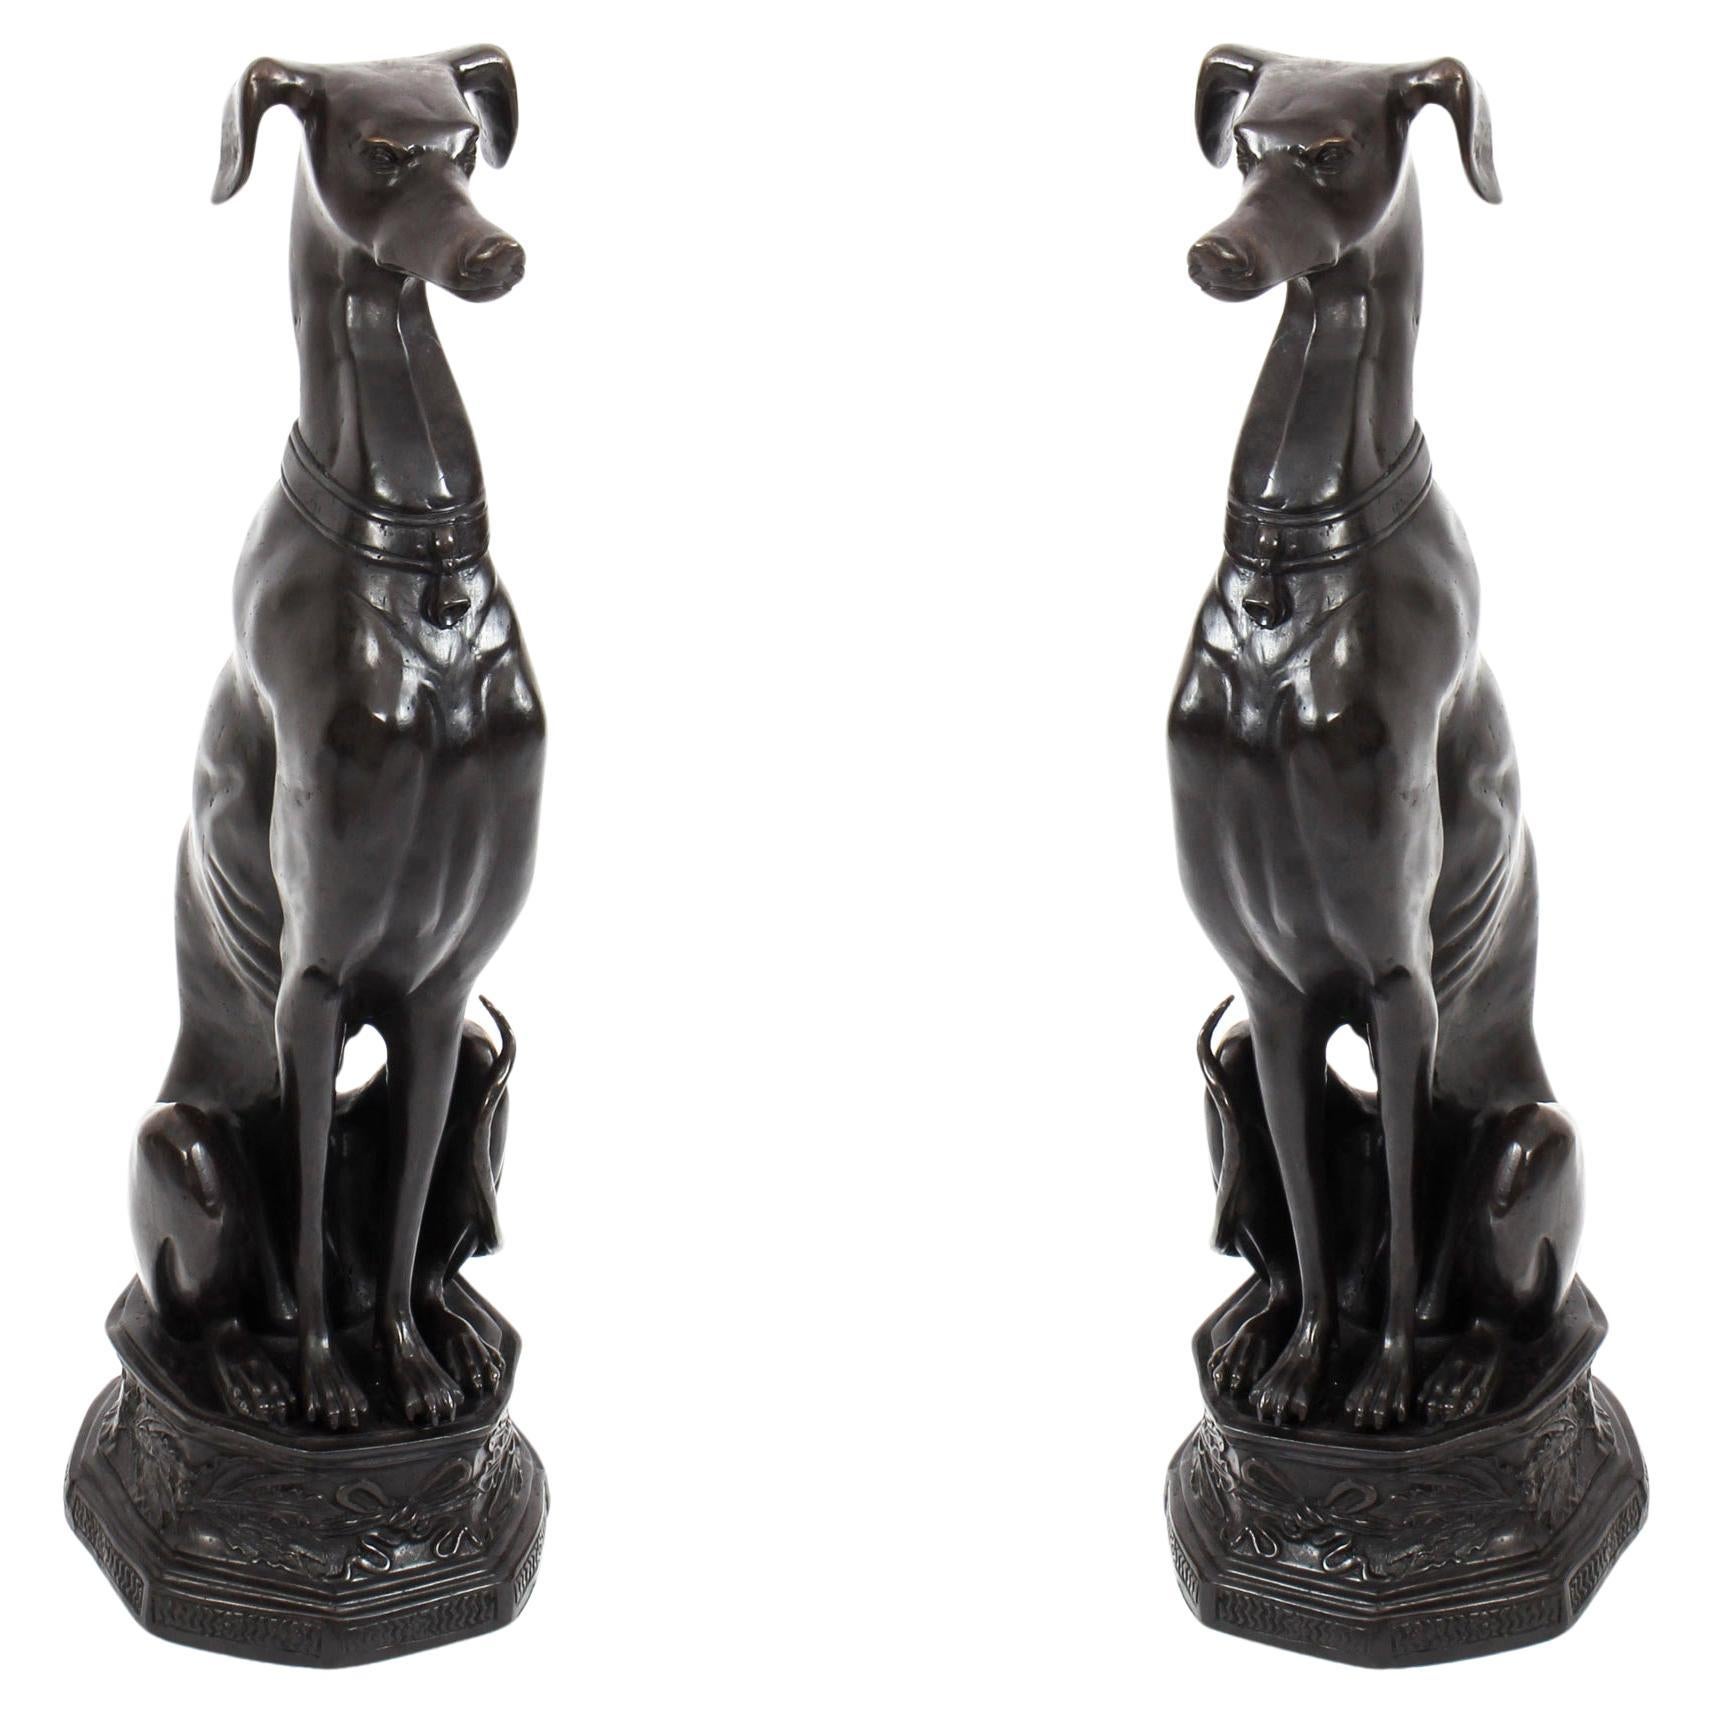 Vintage Pair of Large Art Deco Revival Bronze Seated Dogs 20th Century For Sale